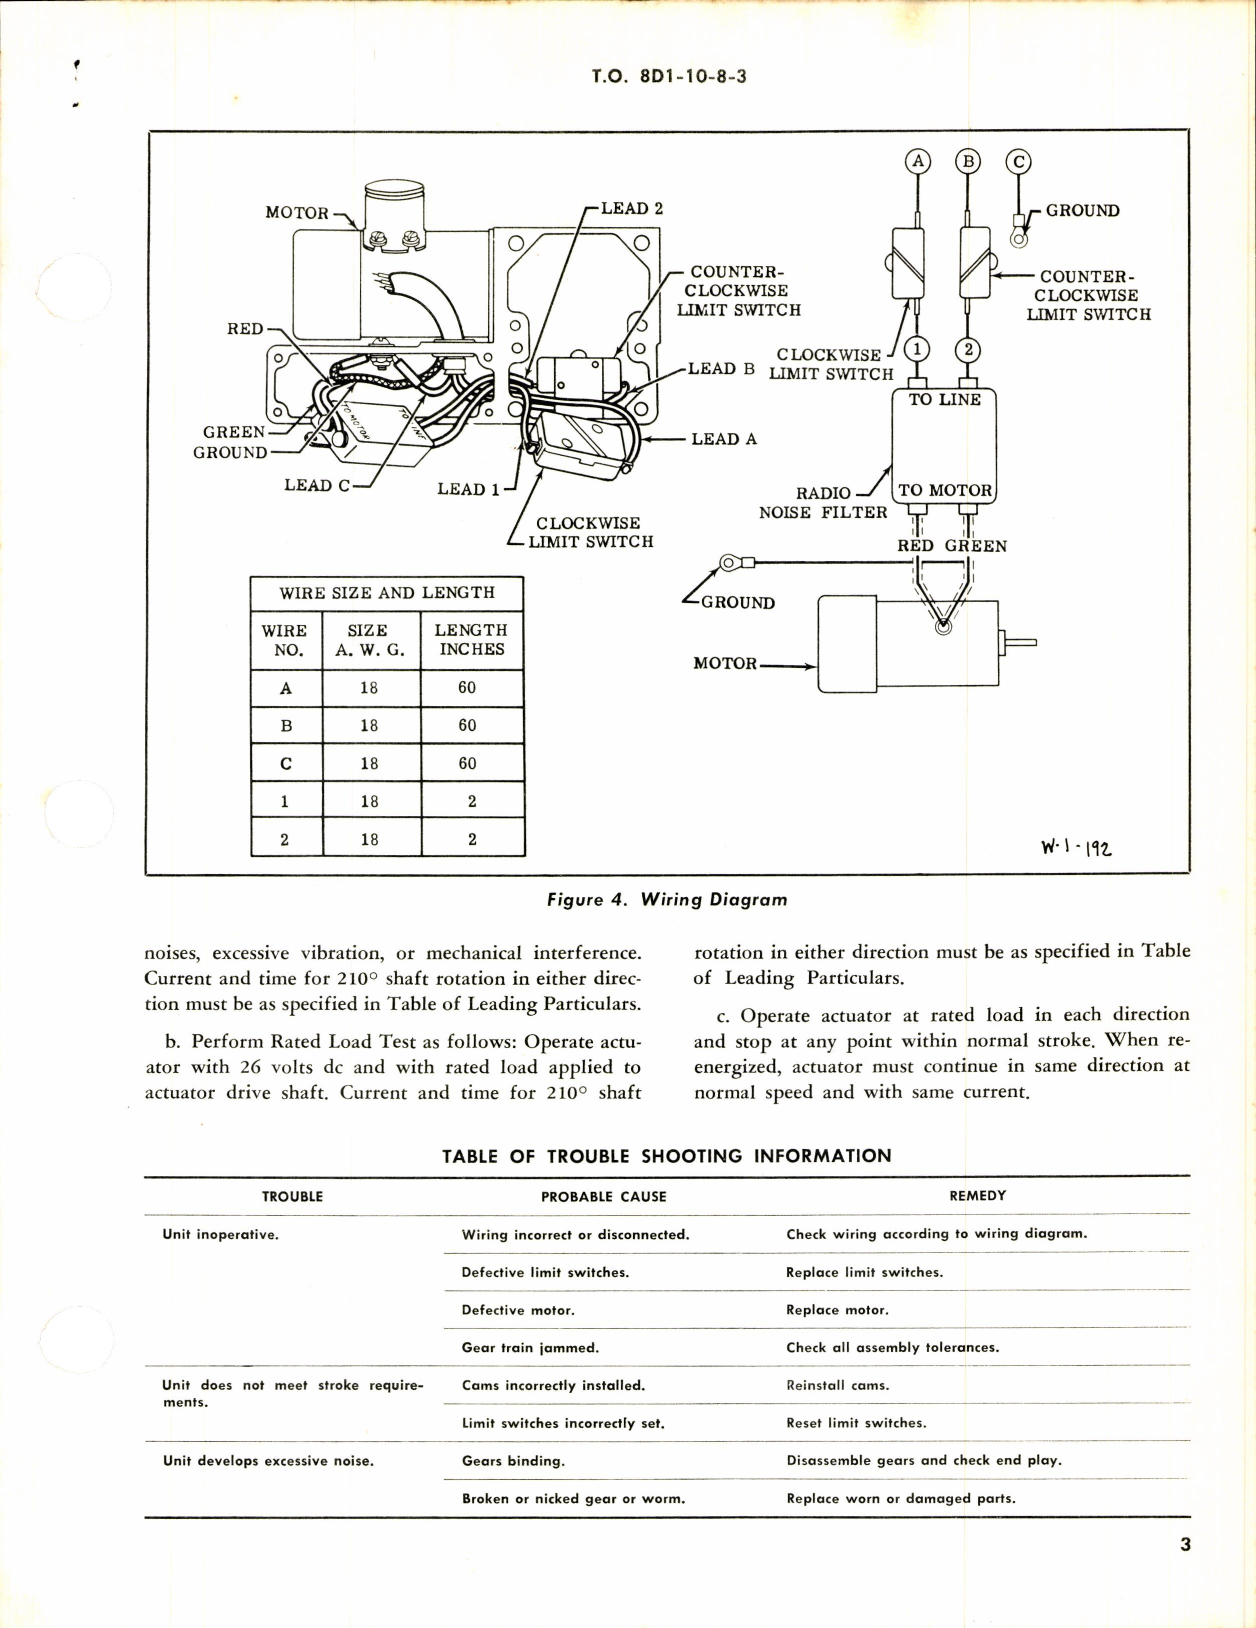 Sample page 3 from AirCorps Library document: Overhaul Instructions with Parts Breakdown Torque Actuator